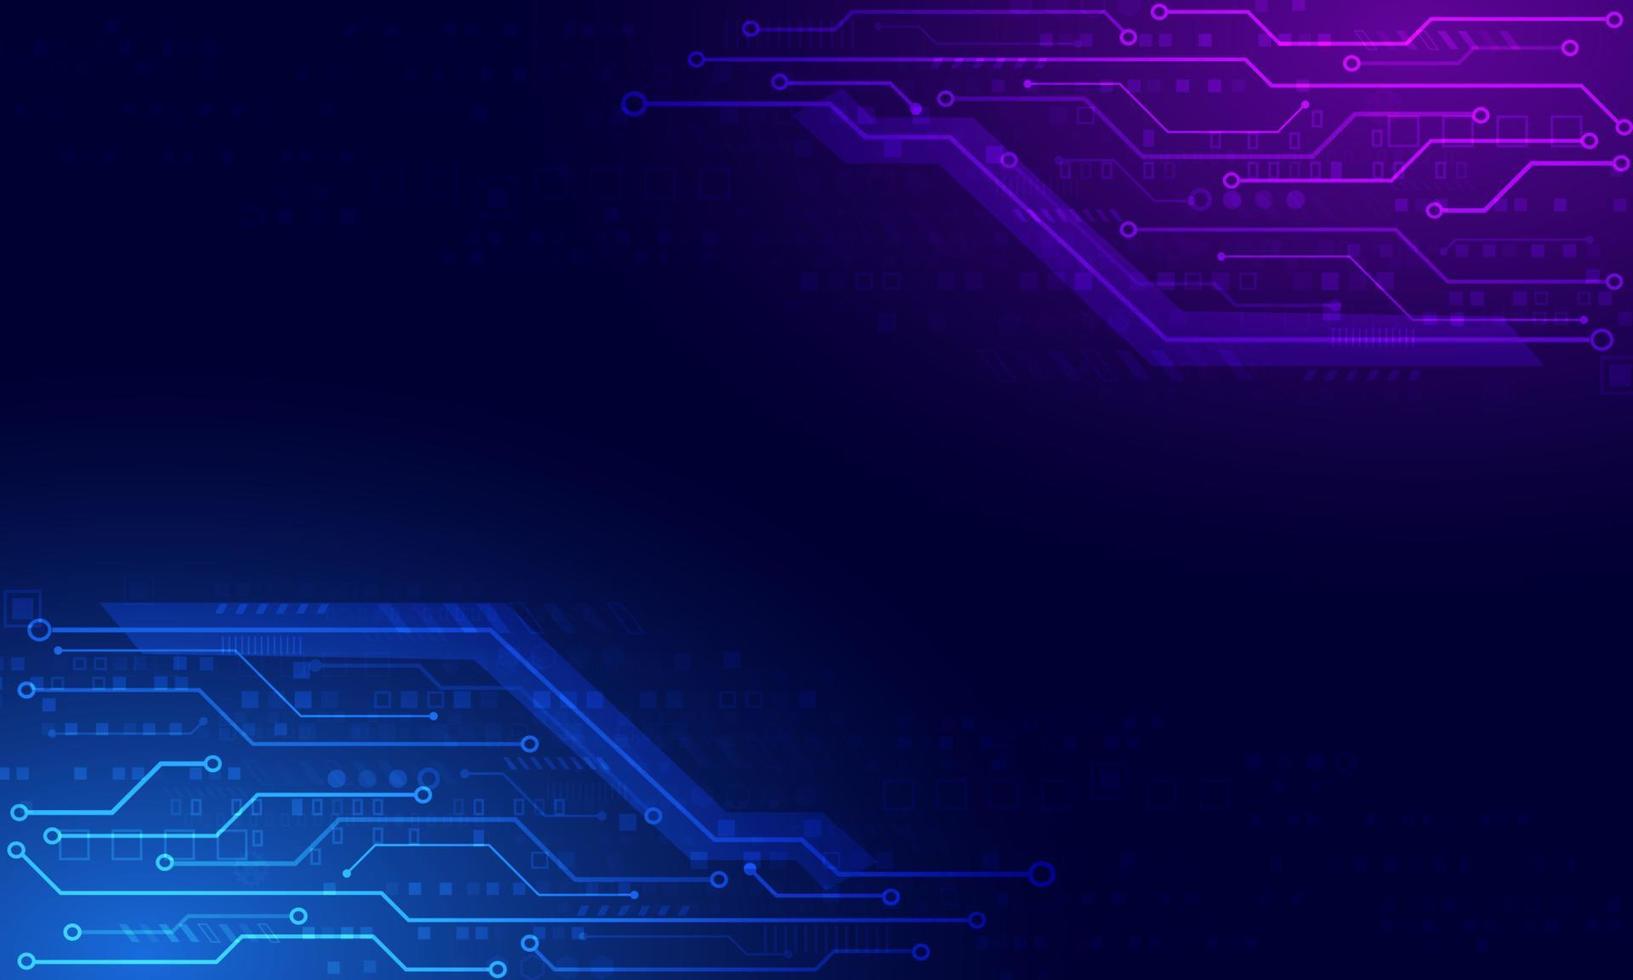 circuit board technology background. purple and blue light  banner.electronic system concept. vector